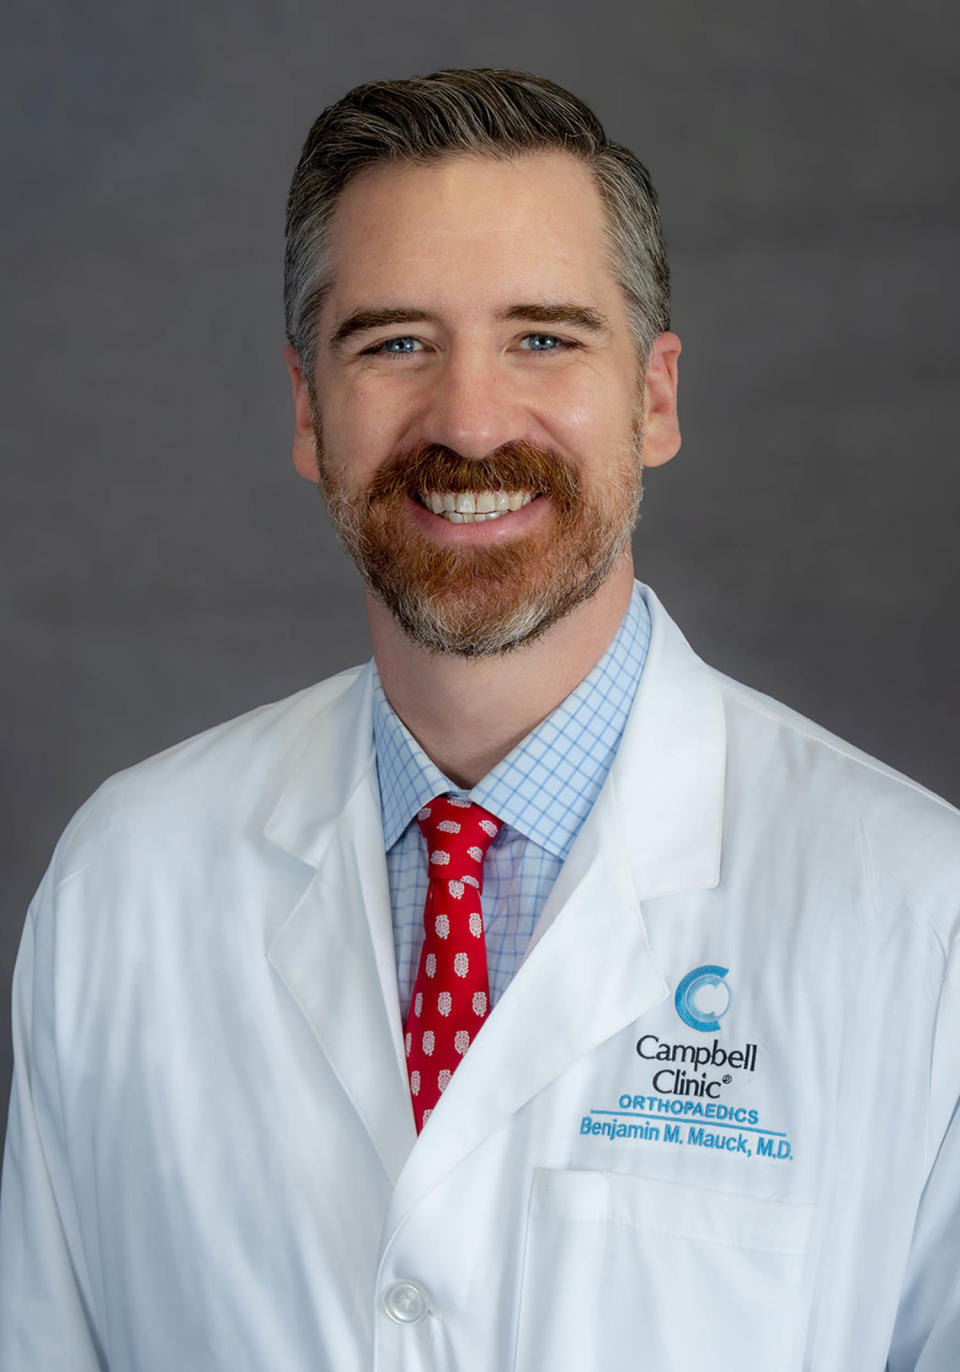  Dr. Ben Mauck (Greg Campbell /  Courtesy Campbell Clinic)